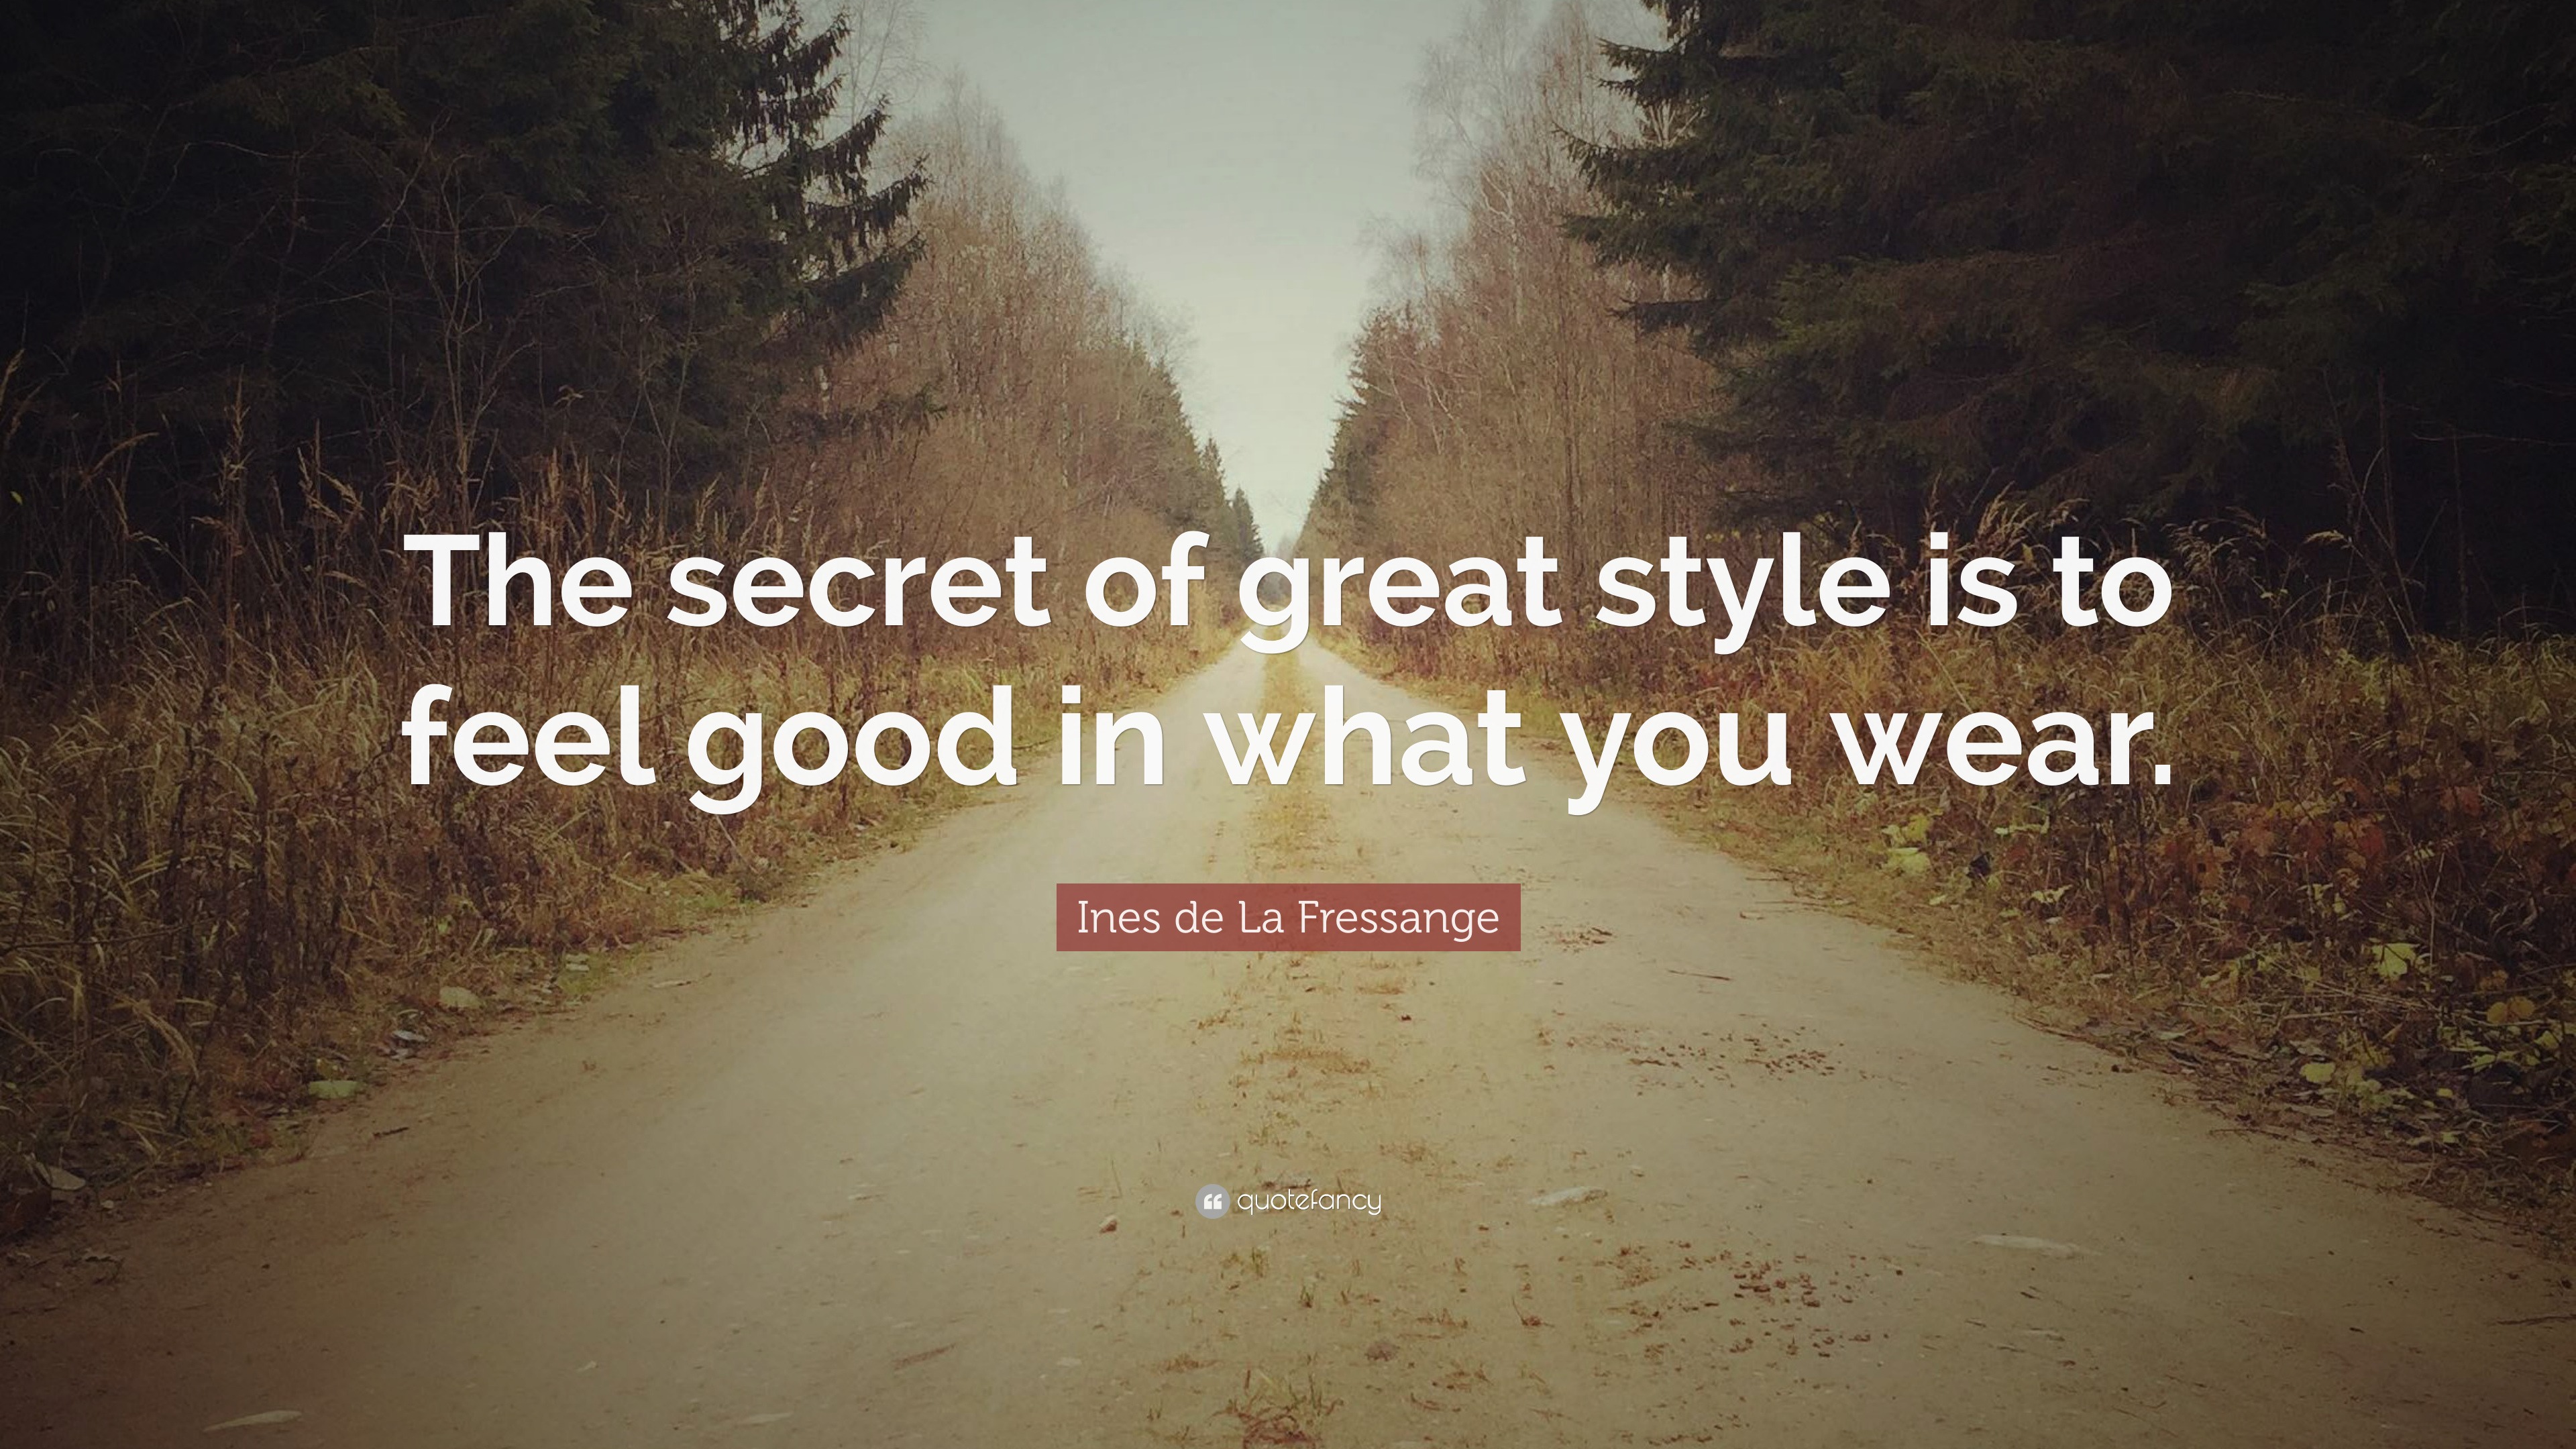 Ines de La Fressange Quote: “The secret of great style is to feel good in  what